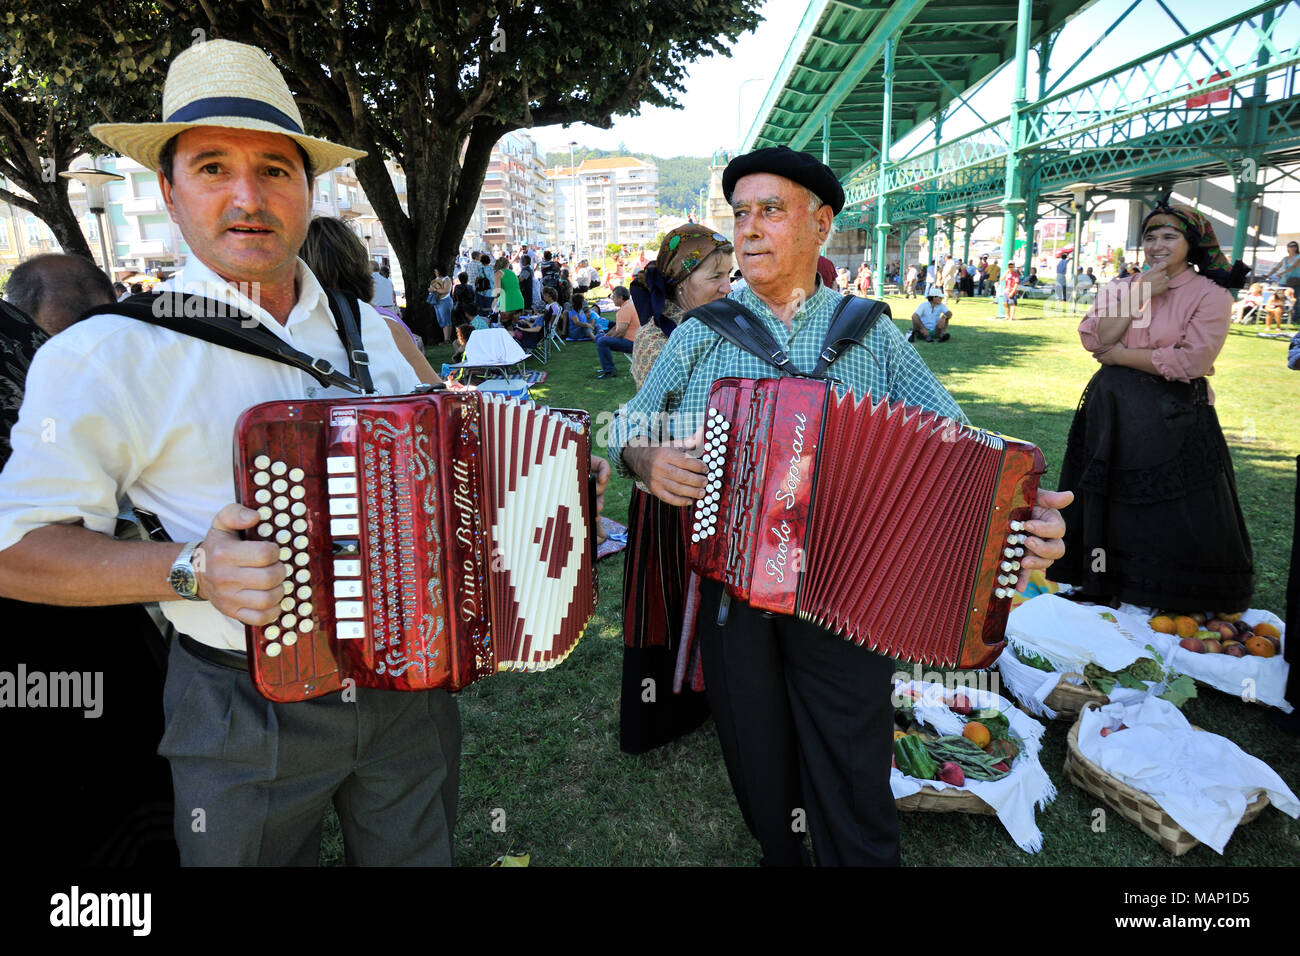 Accordion players. Our Lady of Agony Festivities, the biggest traditional festival in Portugal. Viana do Castelo. Stock Photo